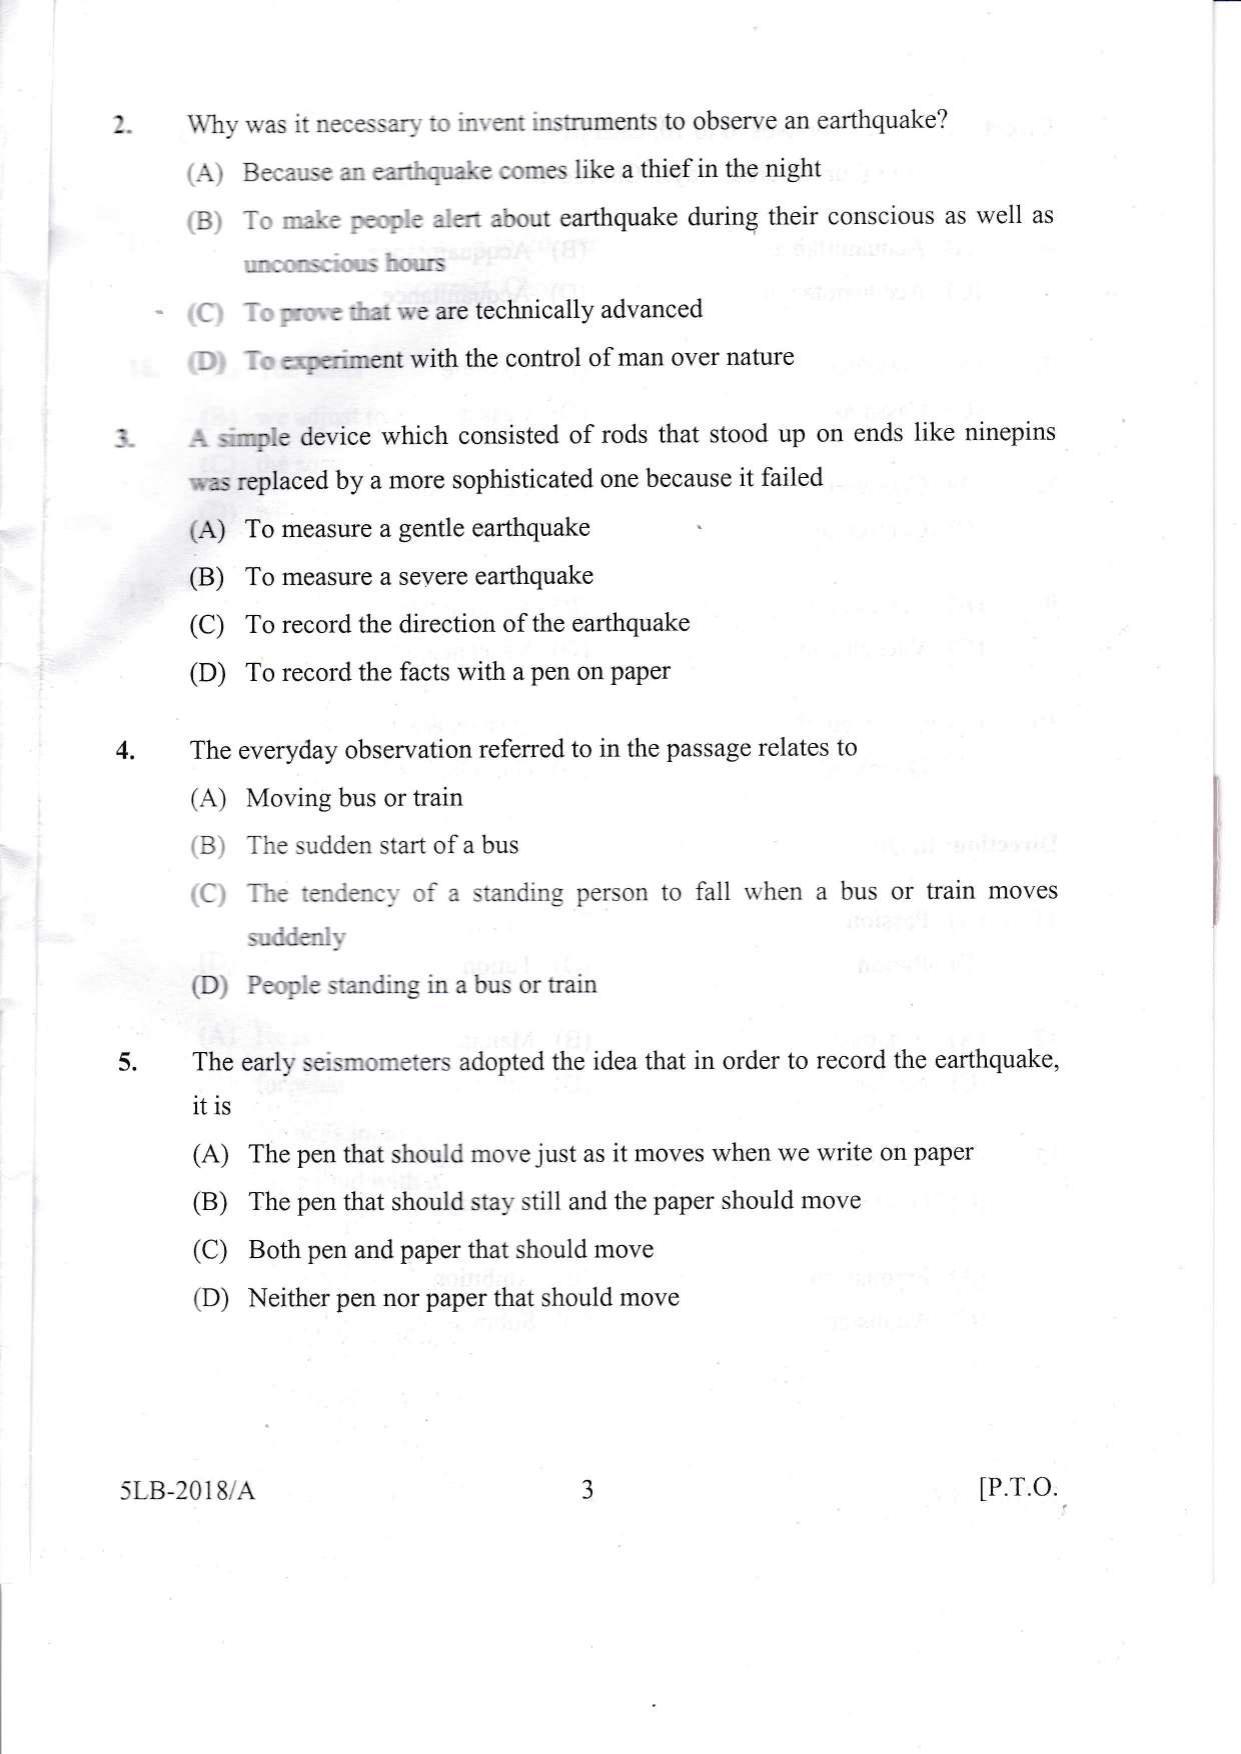 KLEE 5 Year LLB Exam 2018 Question Paper - Page 3